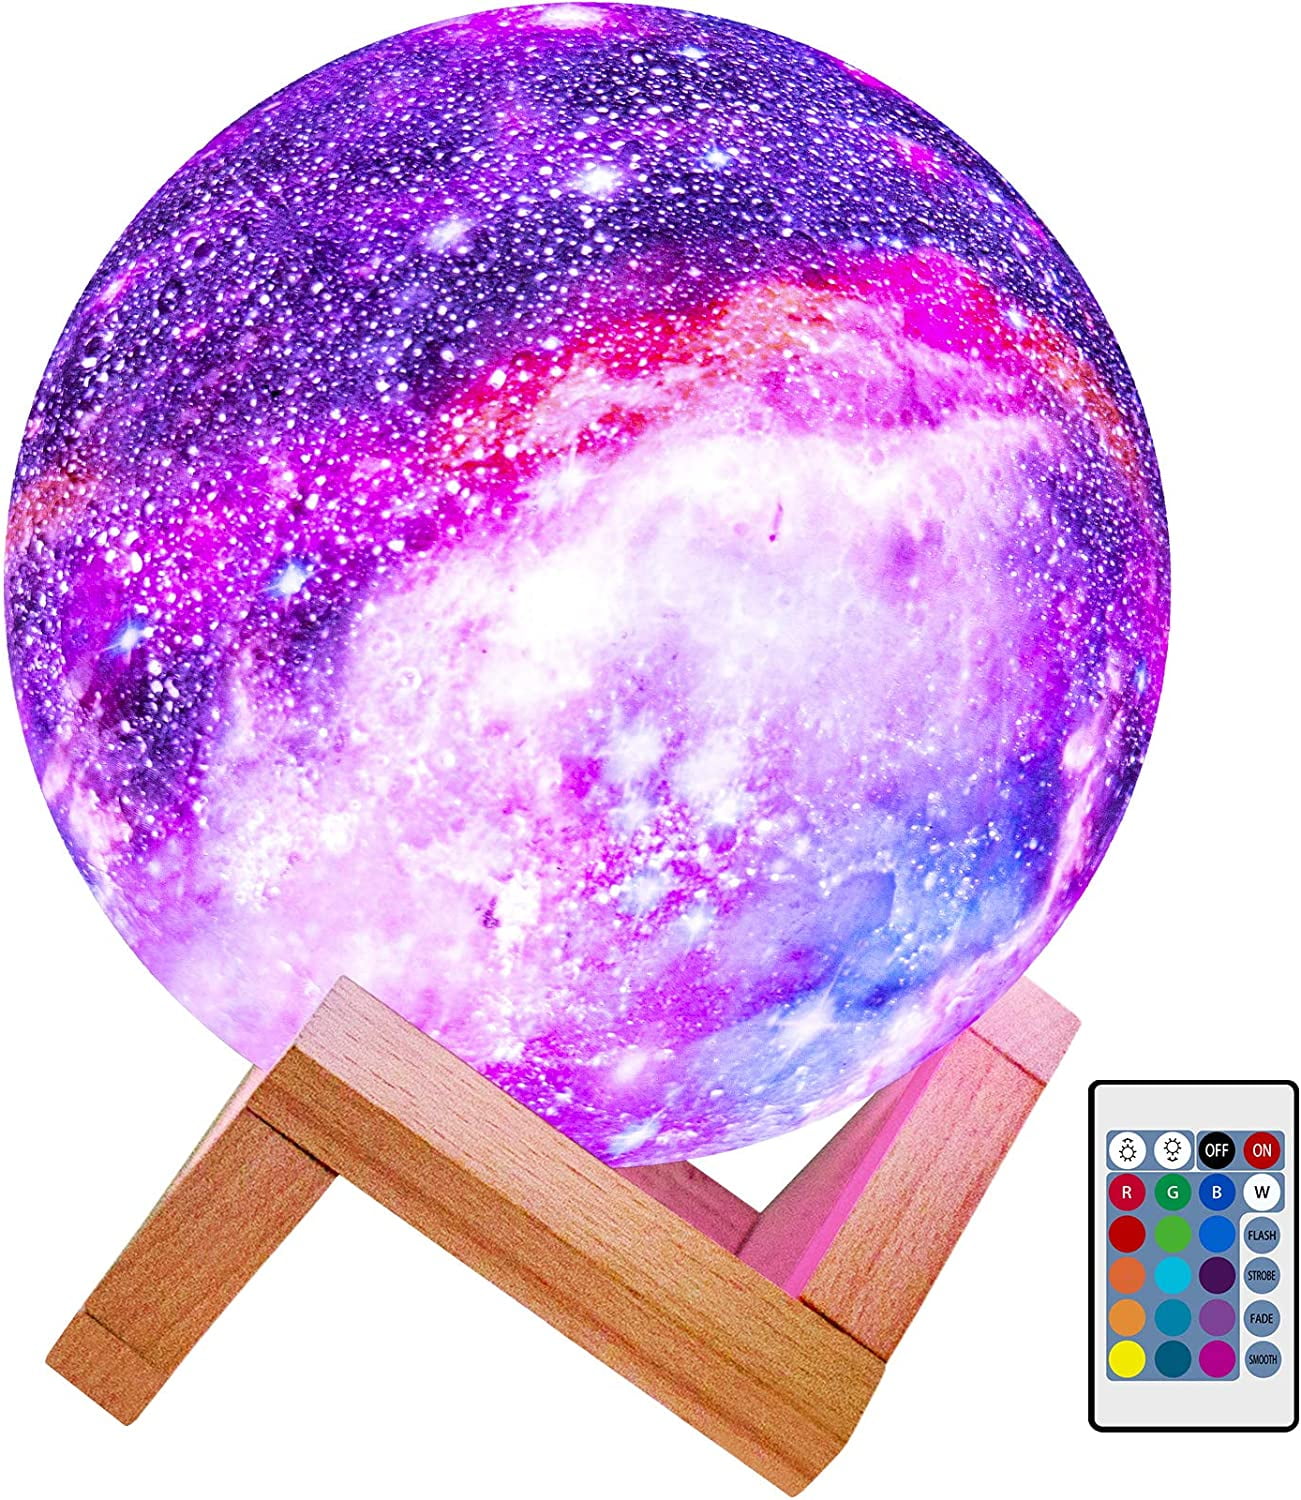 Touch & Remote Control USB Rechargeable Gift for Baby Girls Boys Birthday Home Decoration Moon Lamp Kids Night Light Galaxy Lamp 5.9 inch 16 Colors LED 3D Star Moon Light with Wood Stand 